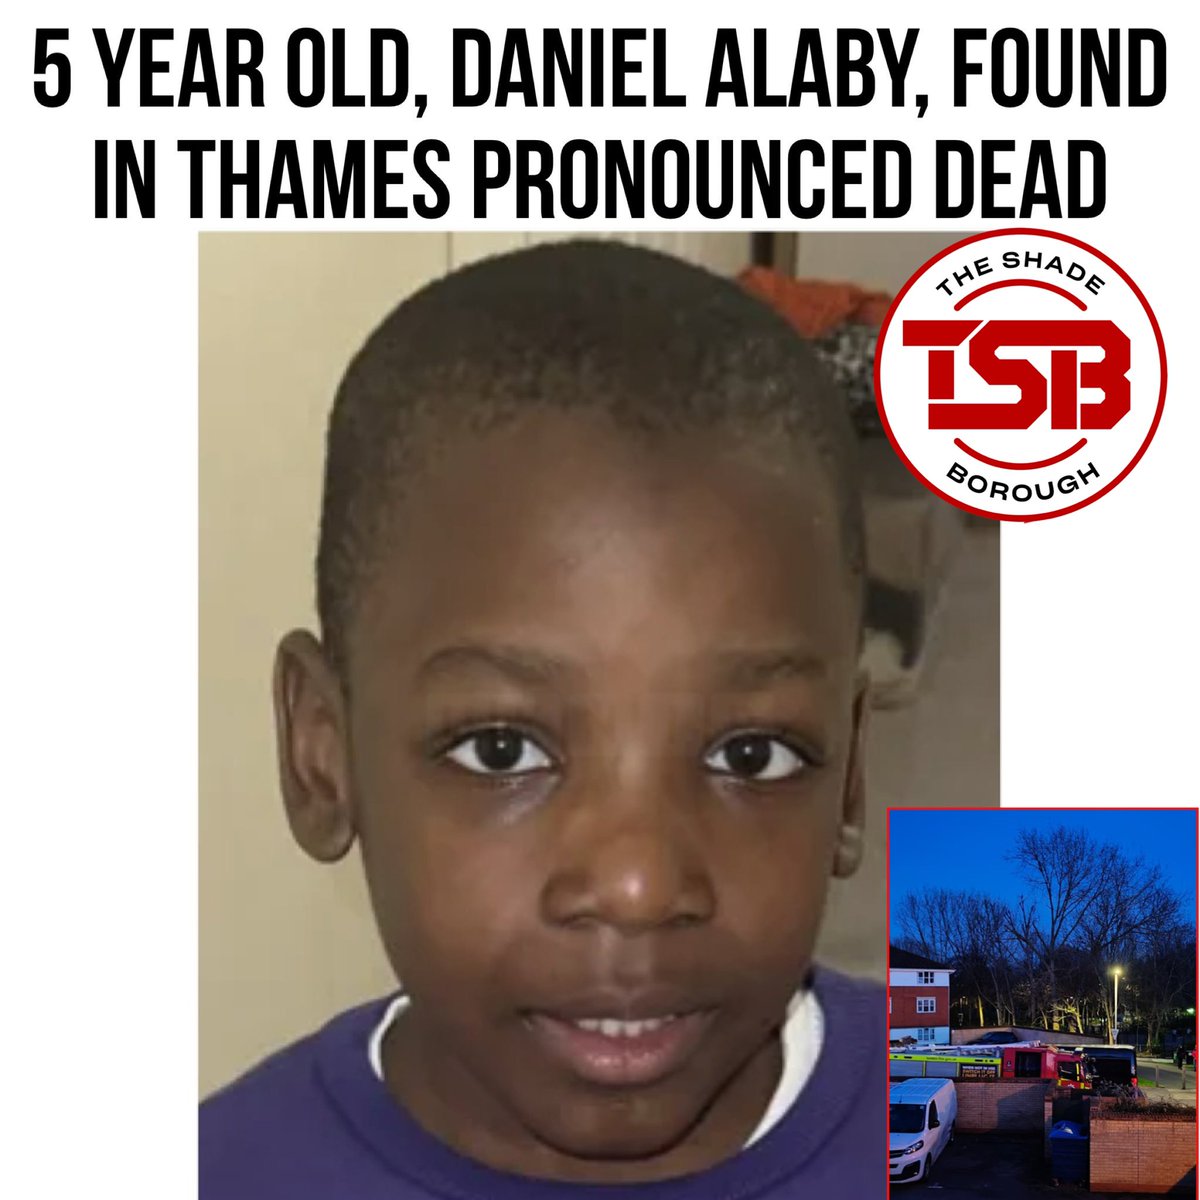 Tragedy strikes as the Metropolitan Police confirms the heartbreaking loss of five-year-old Daniel Alaby, found in the River Thames after a frantic search effort. Police initiated CPR but despite their efforts, Daniel was pronounced dead at the hospital. Police stated no…